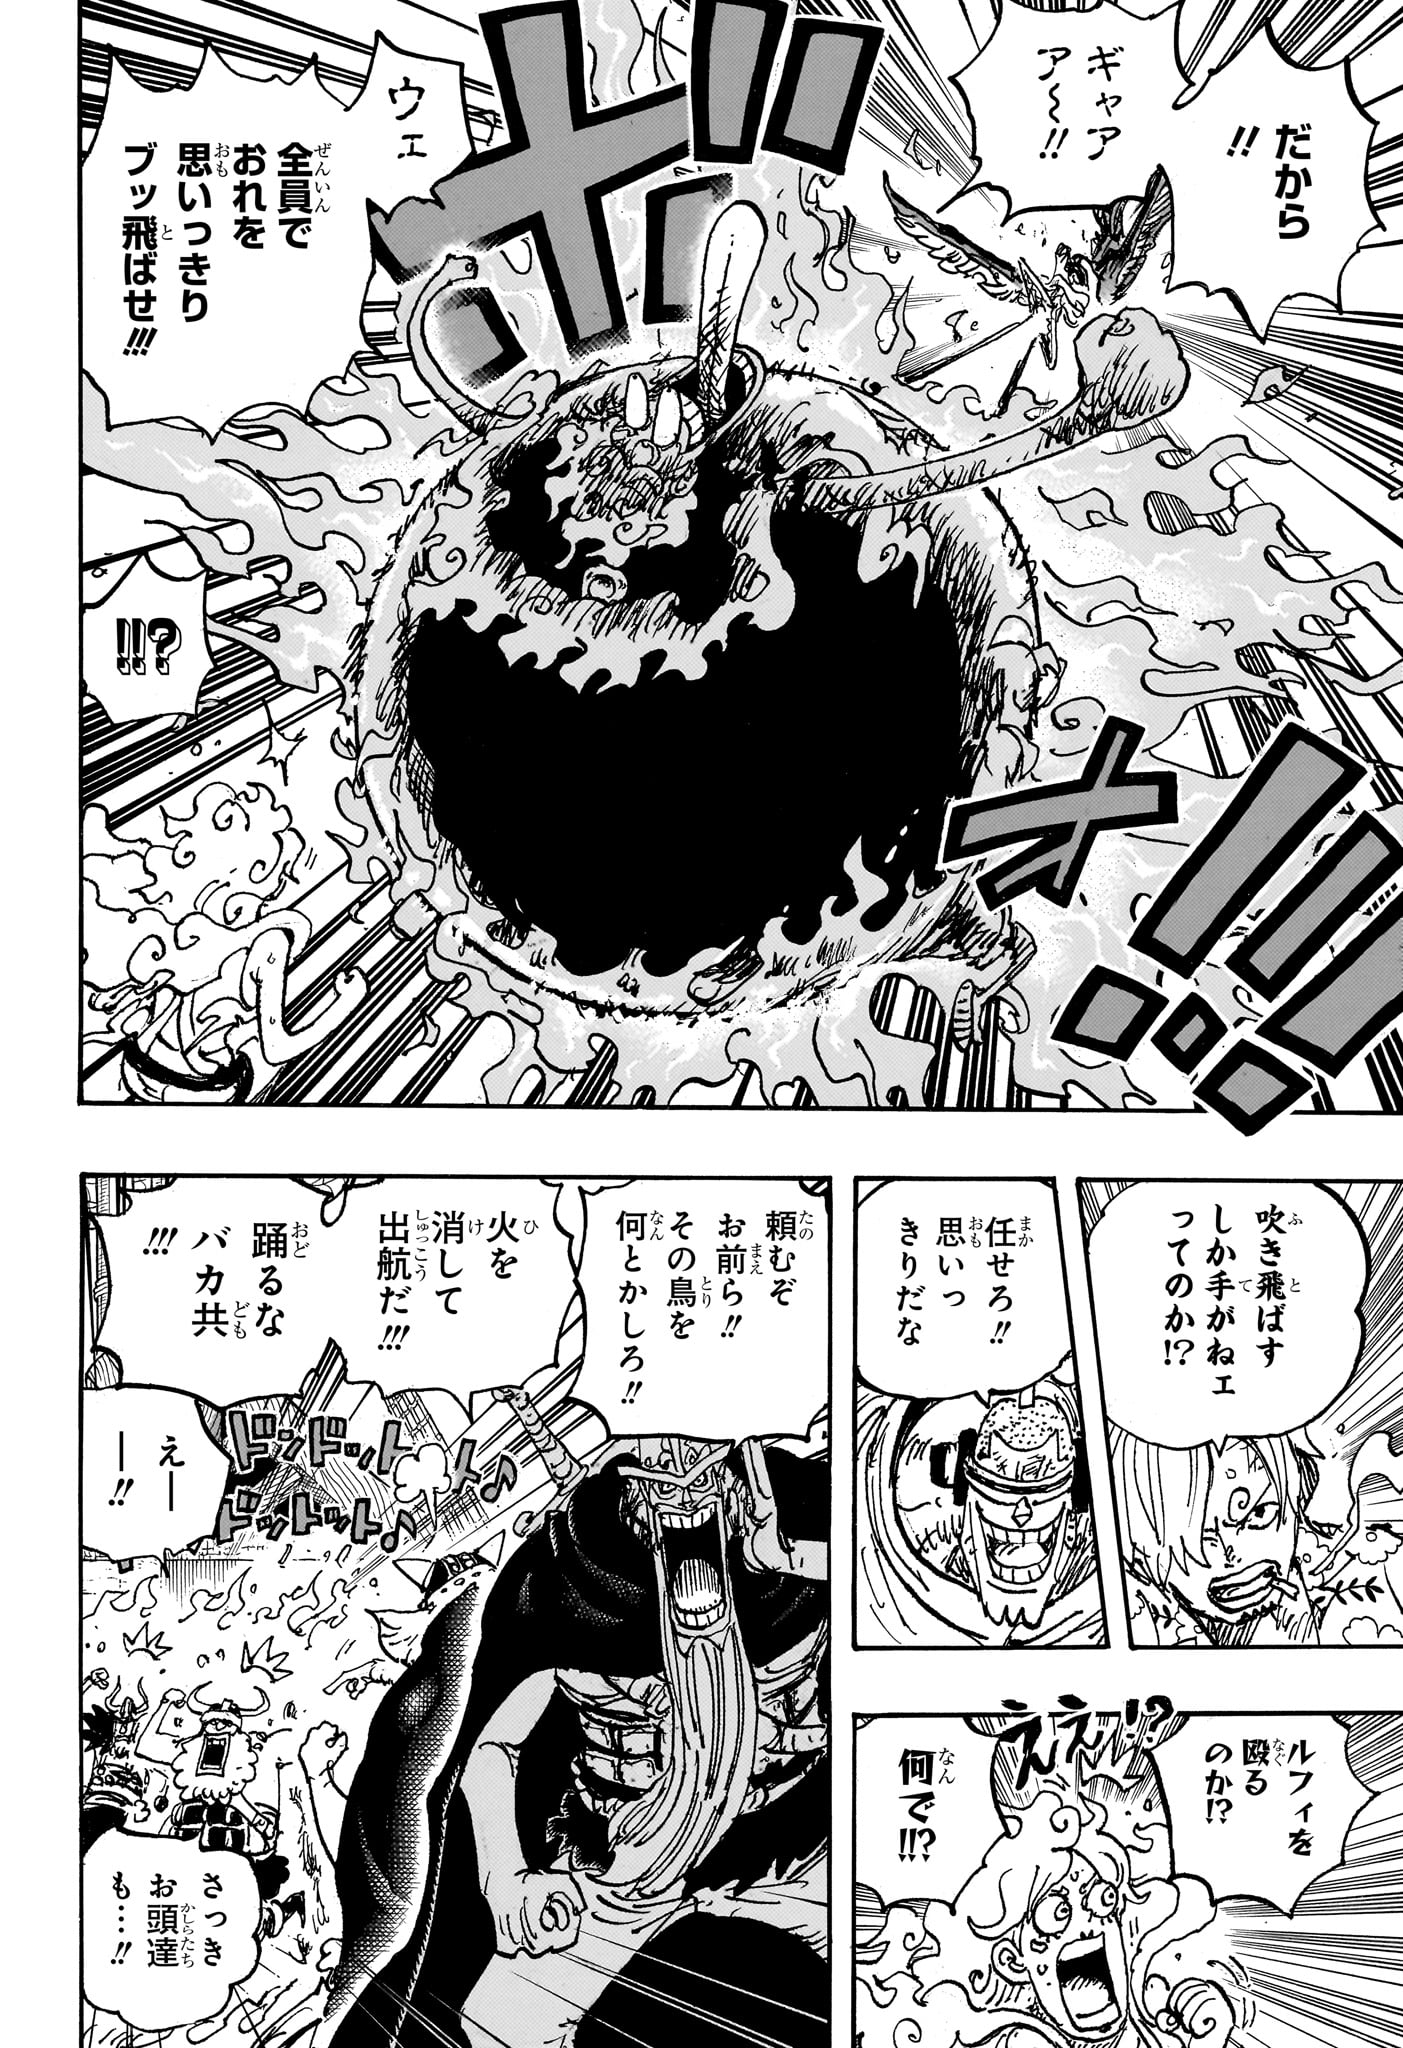 One Piece - Chapter 1119 - Page 4